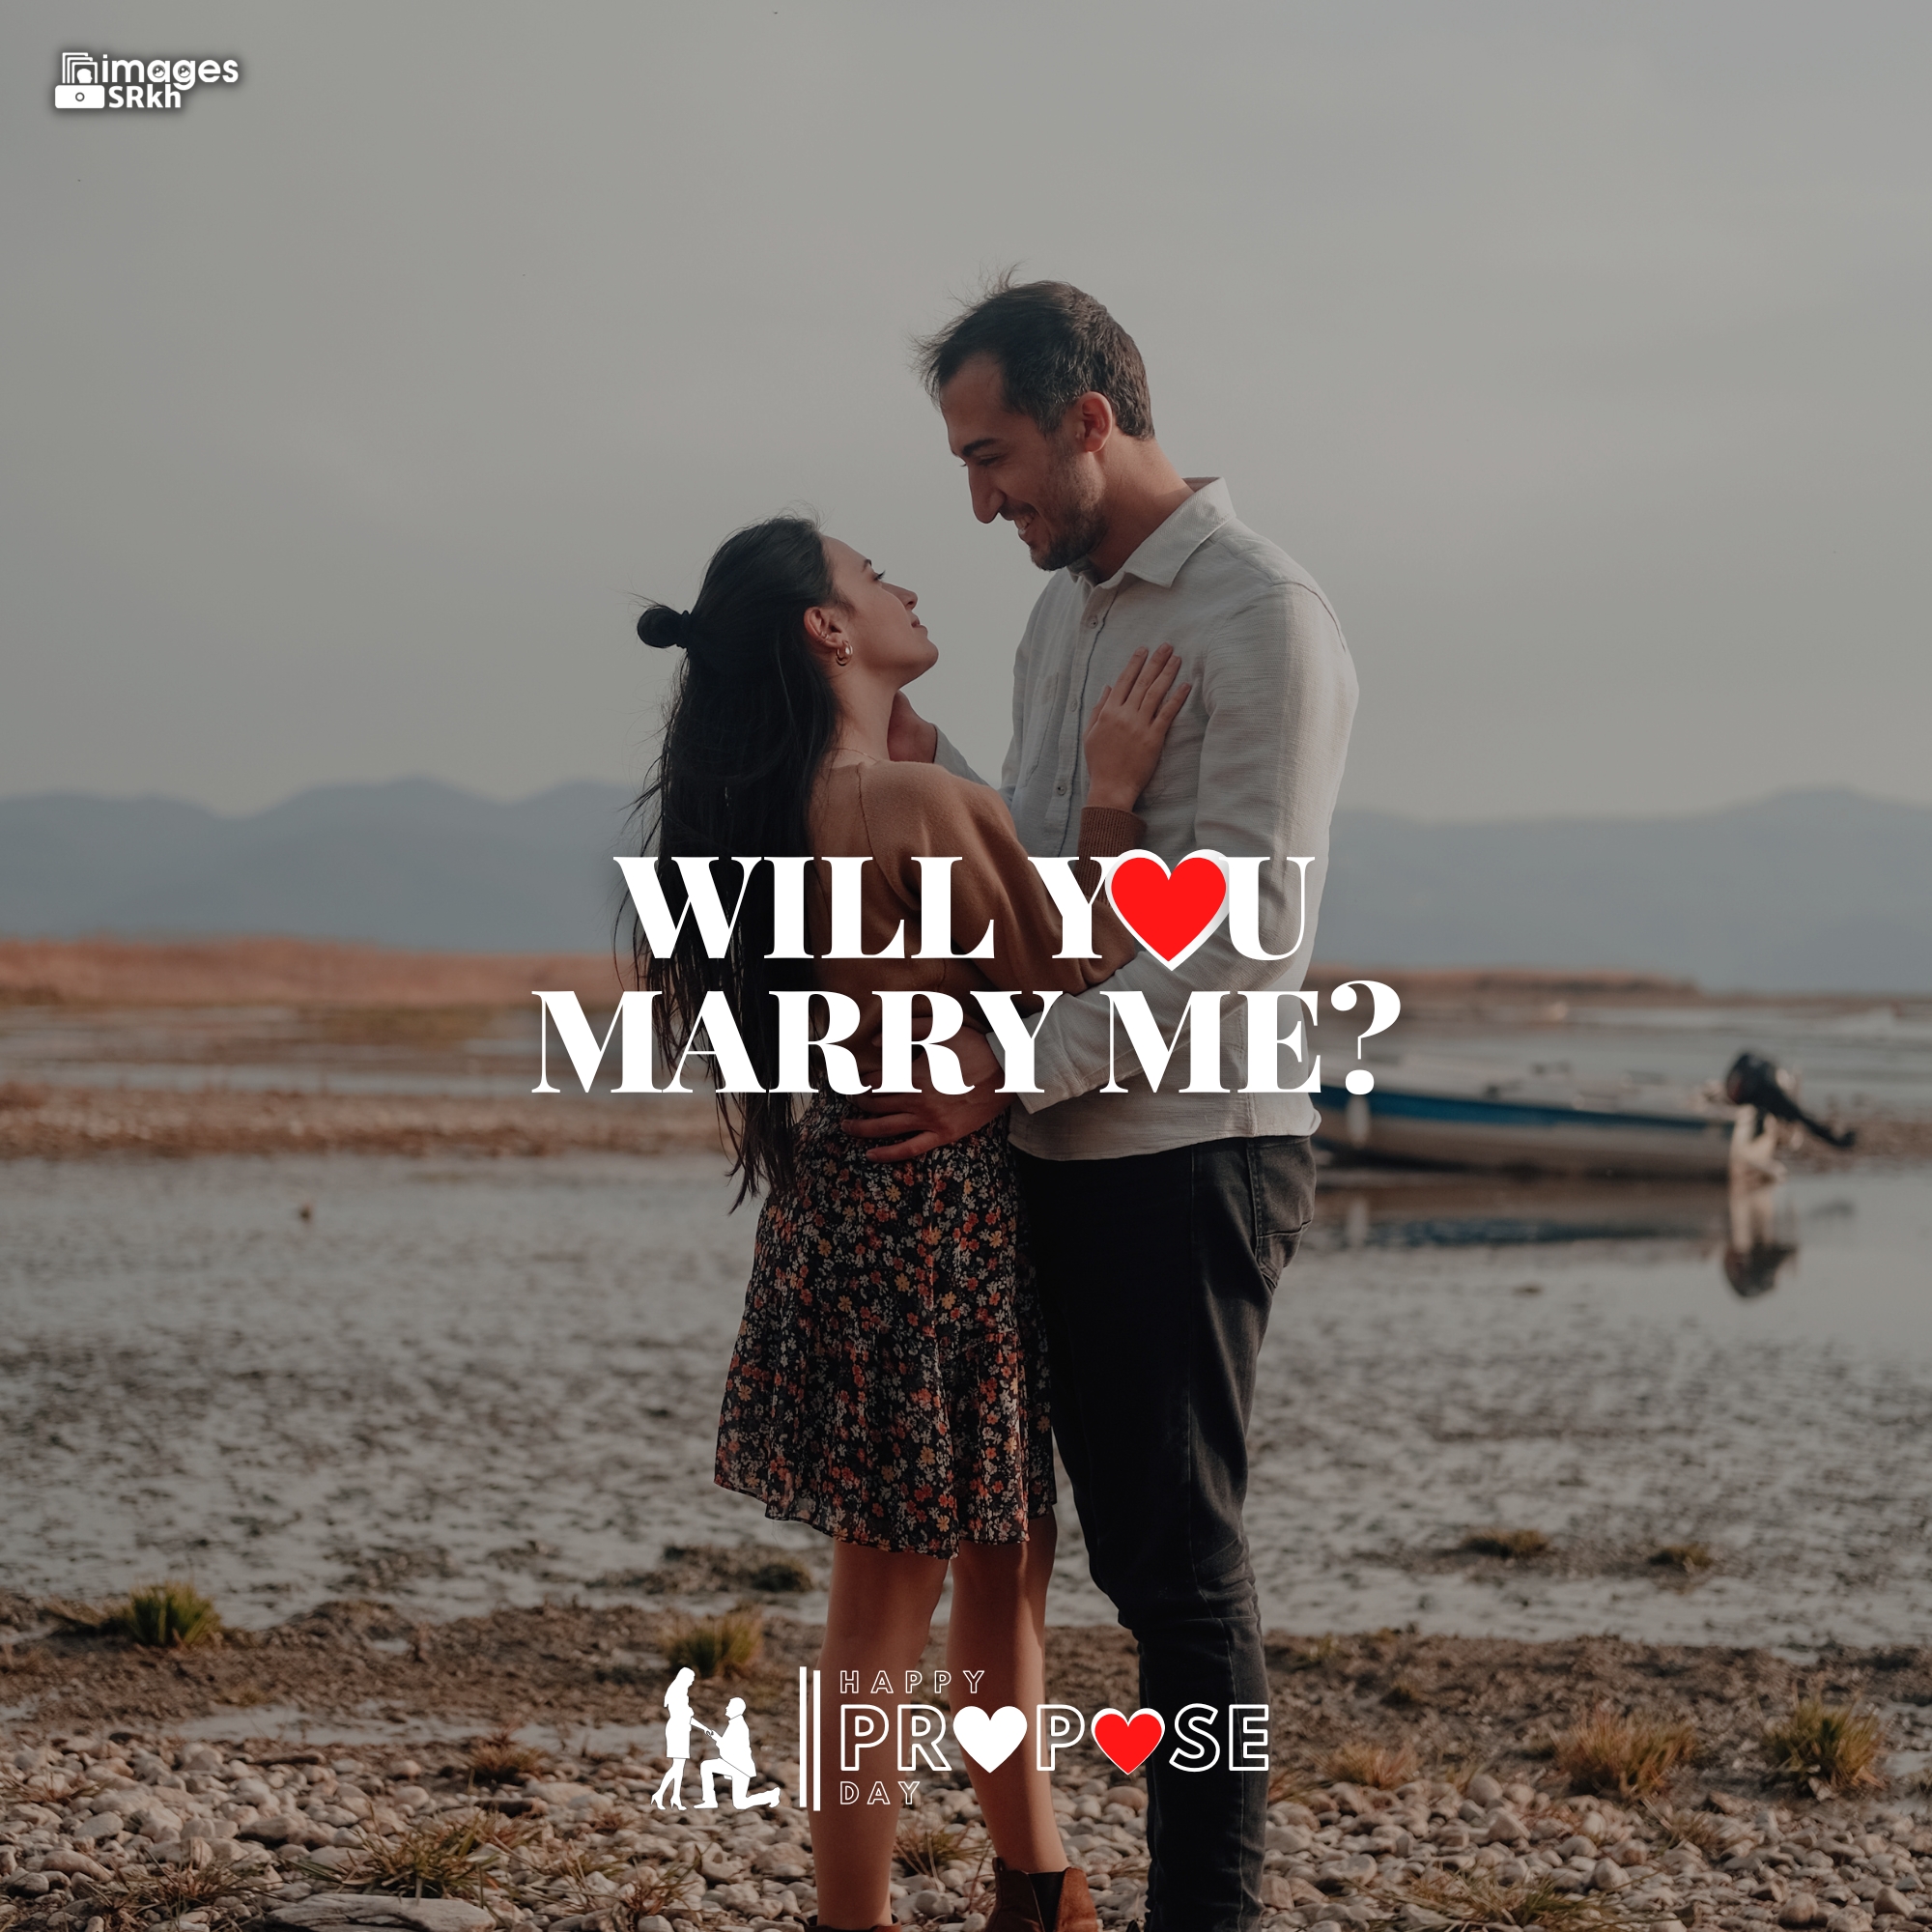 Propose Day Images | 277 | Will You MARRY ME